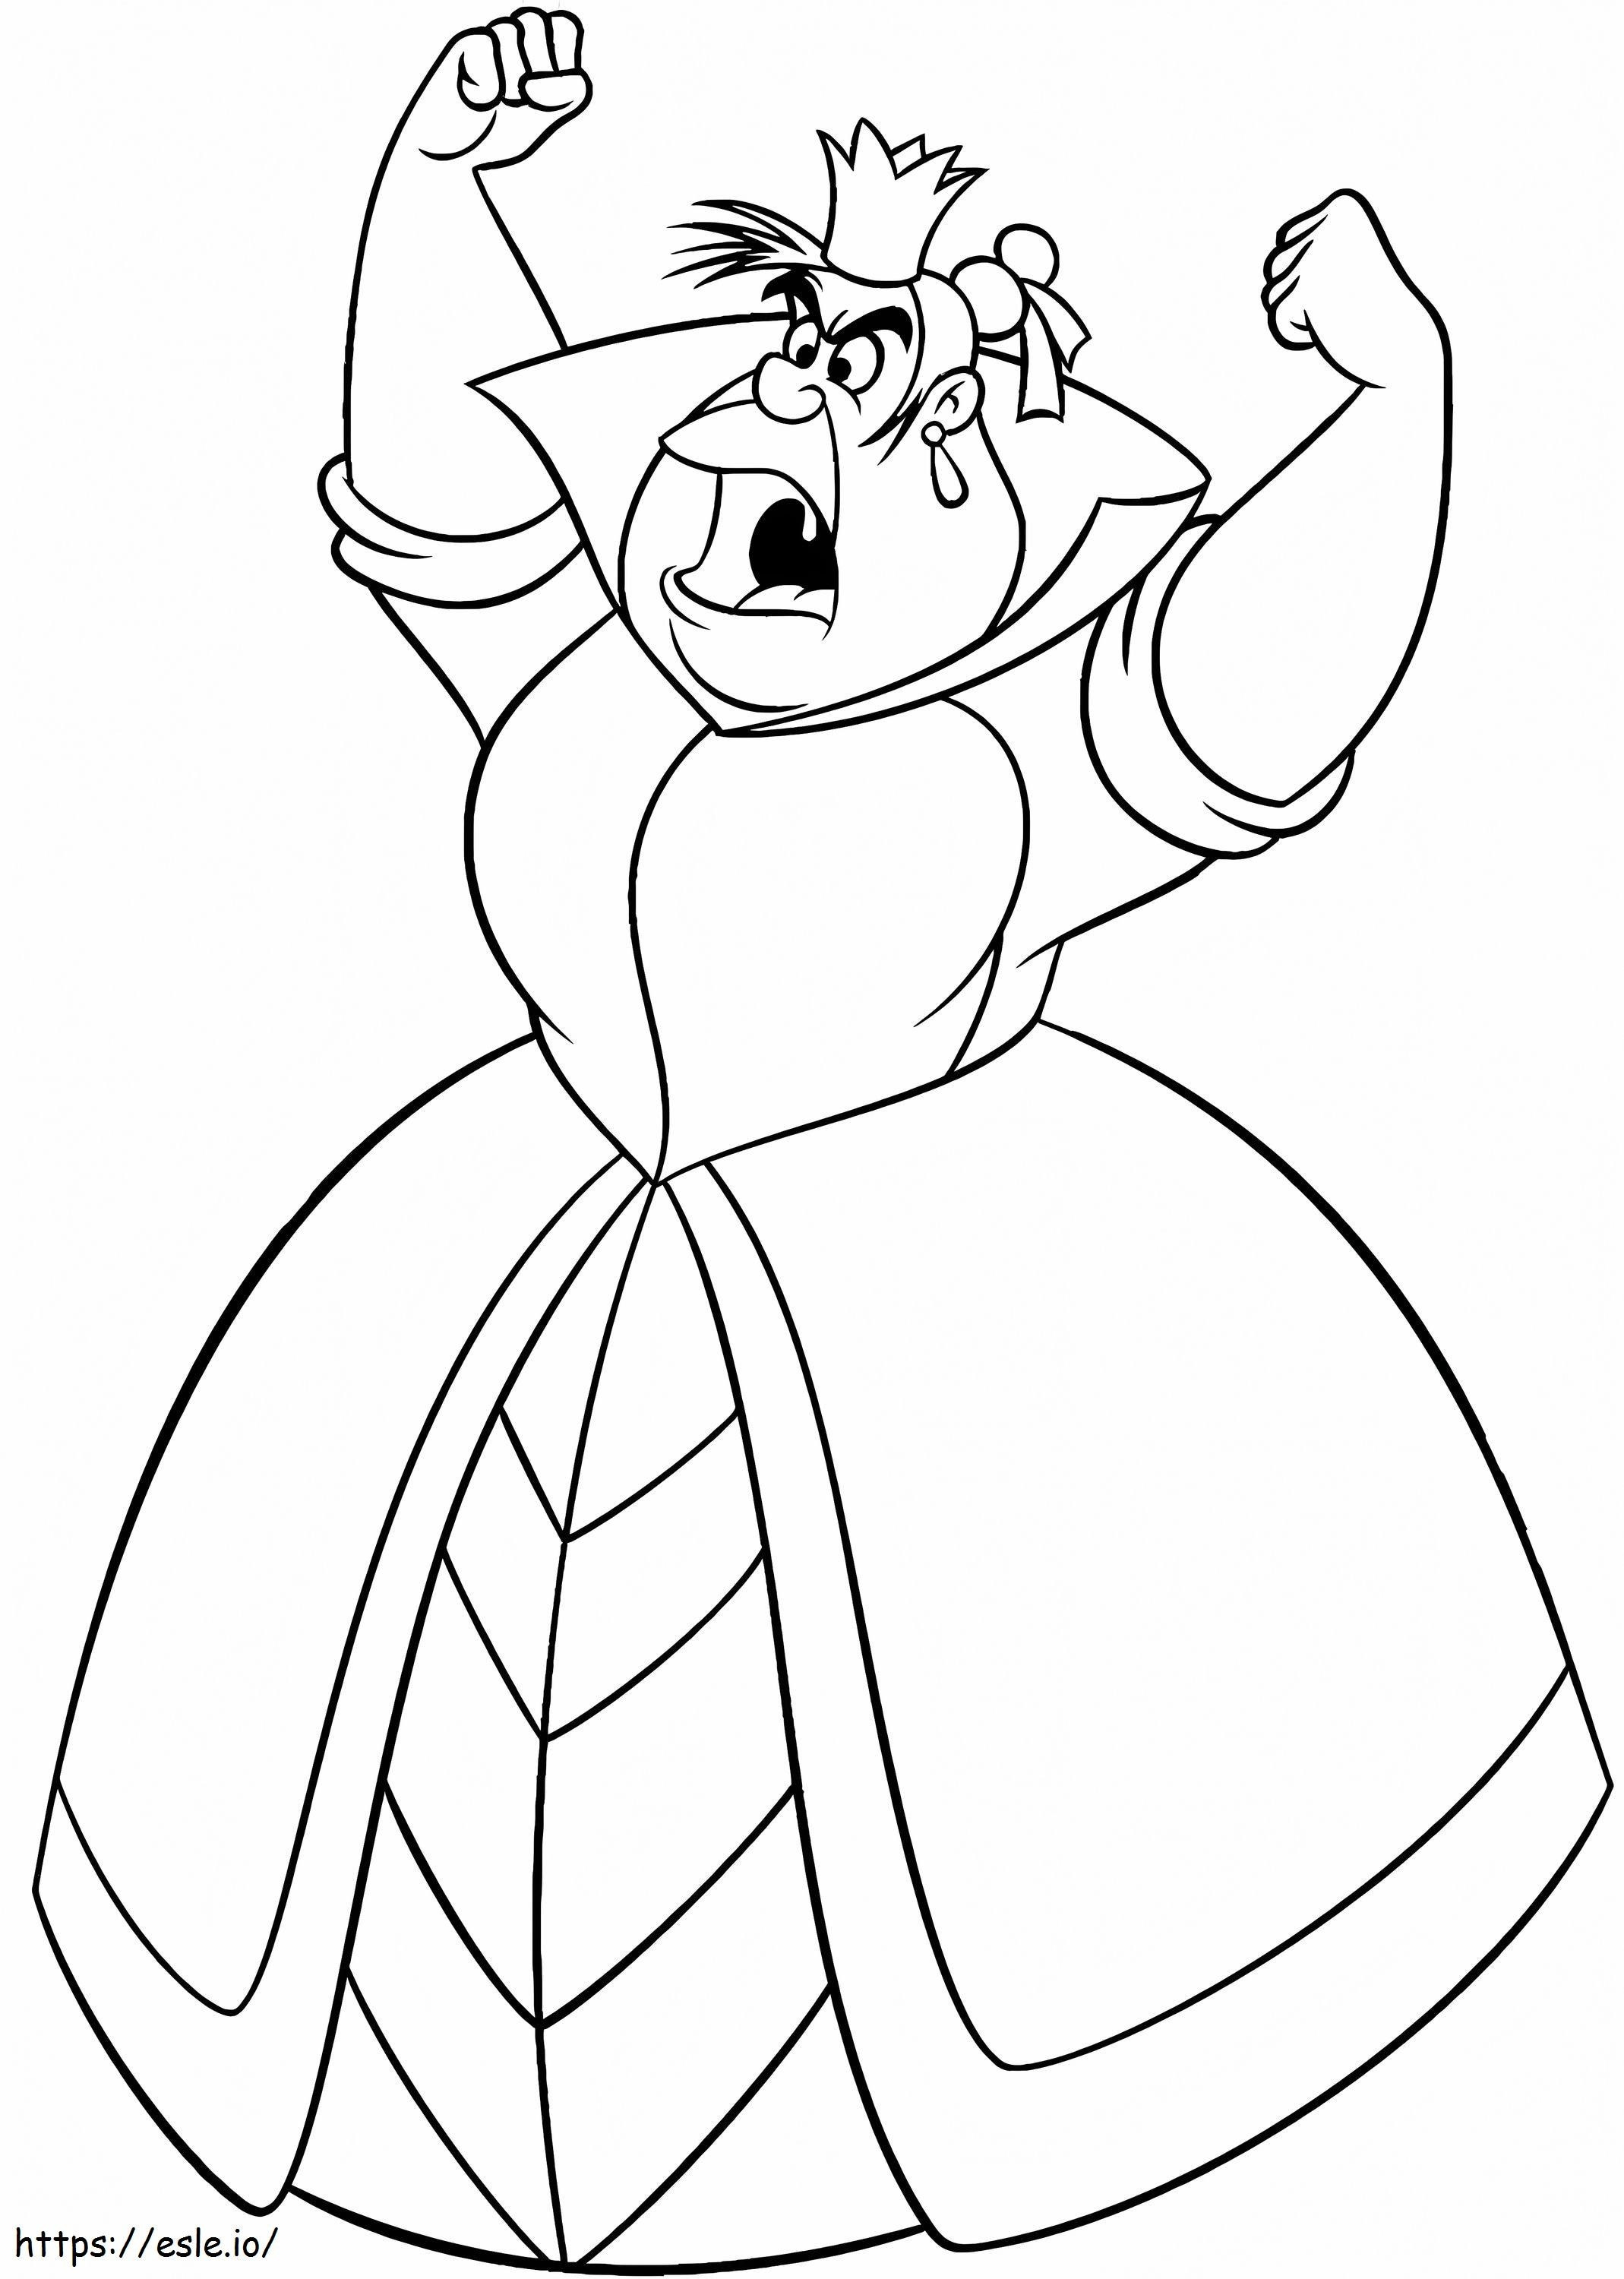 Red Queen Disney Villain coloring page